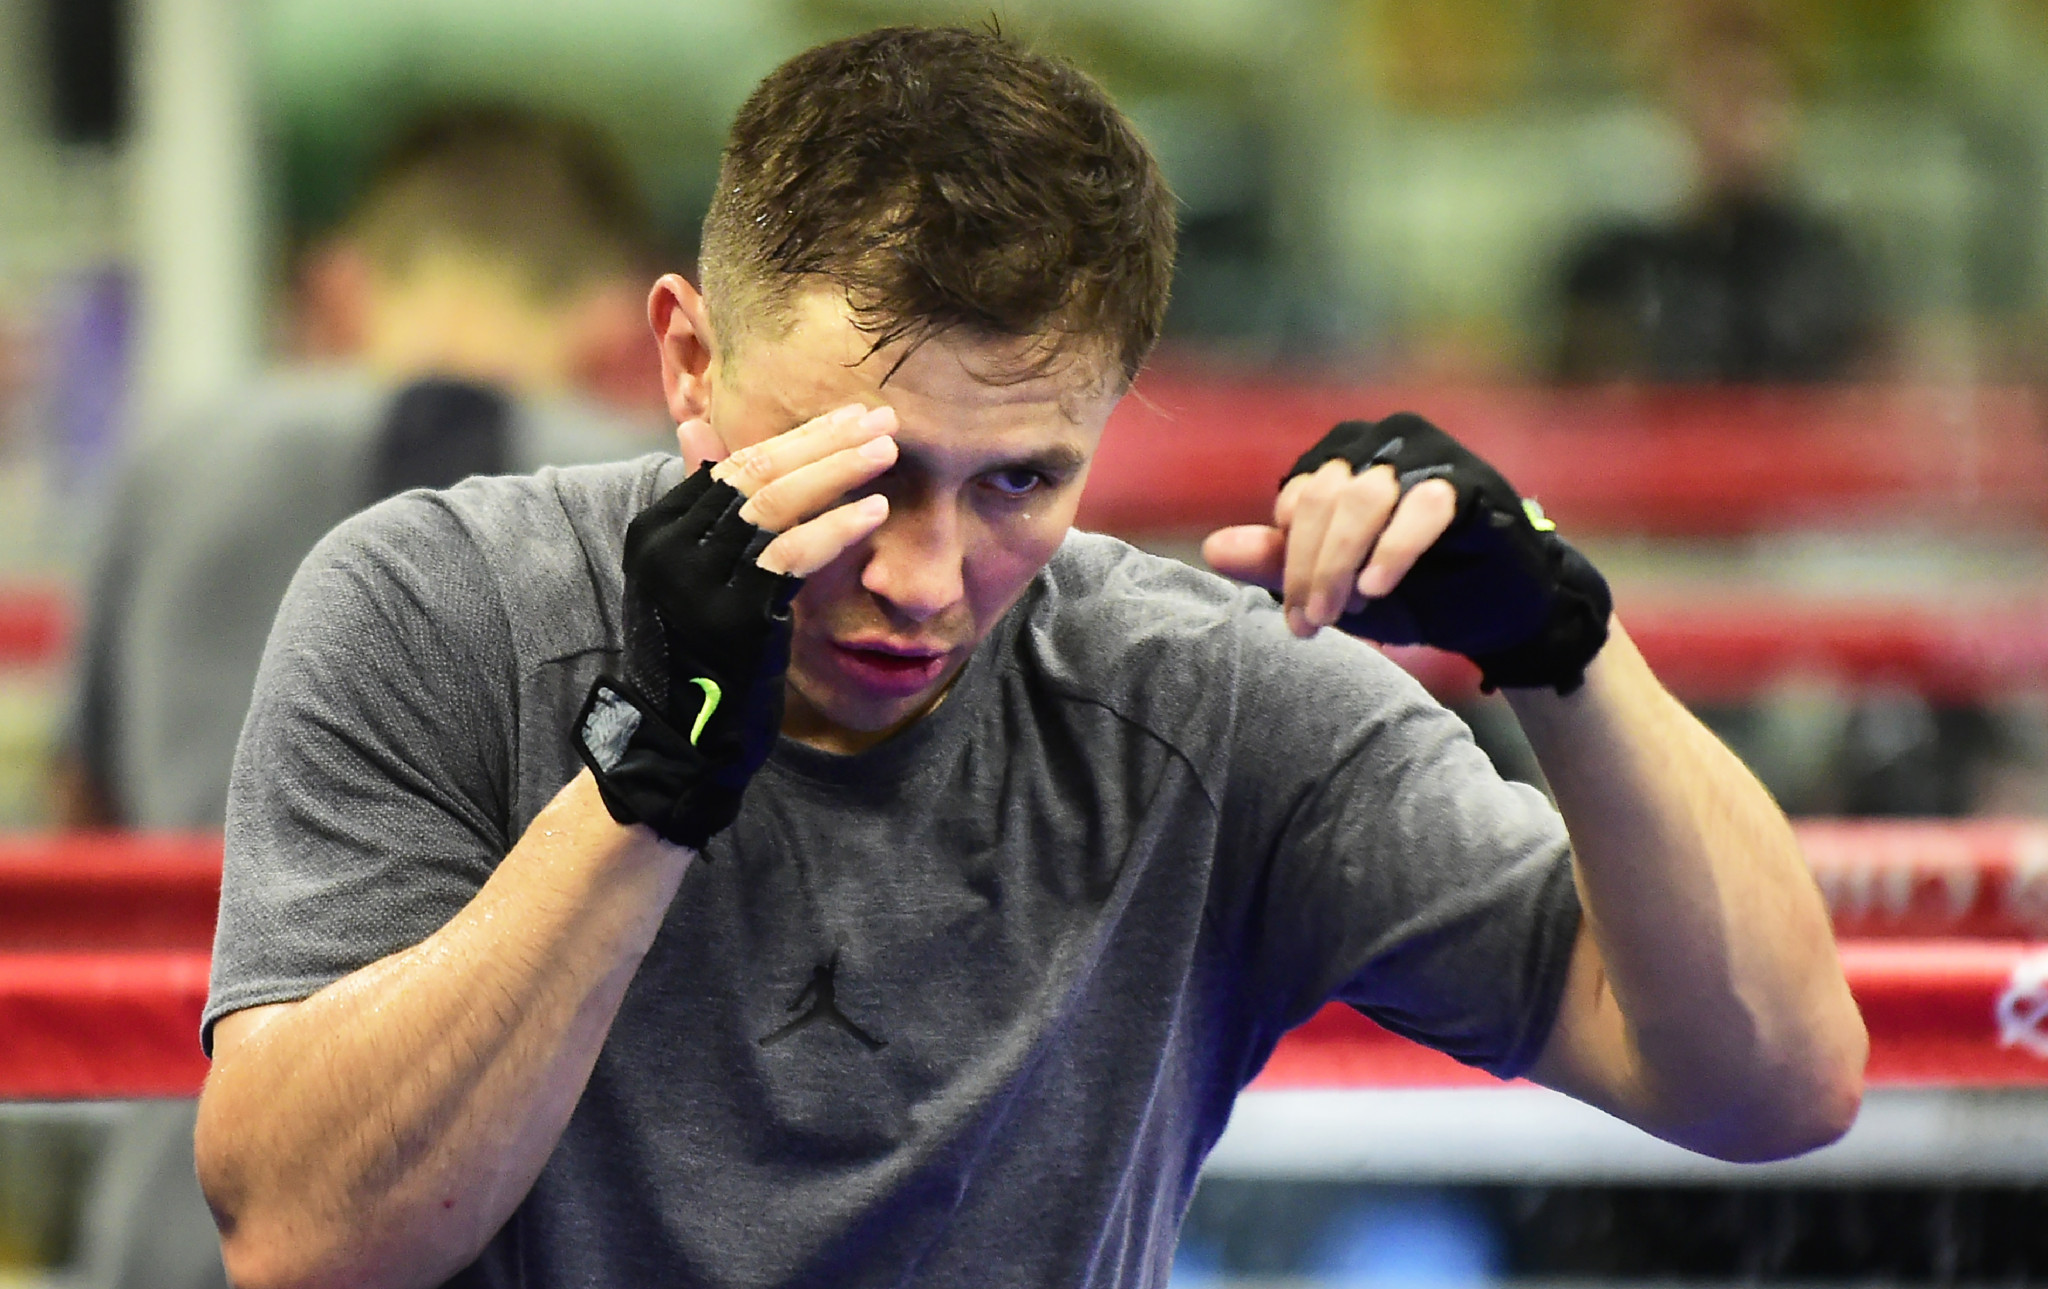 Gennady Golovkin has made further accusations of cheating against upcoming opponent Saul Alvarez ©Getty Images